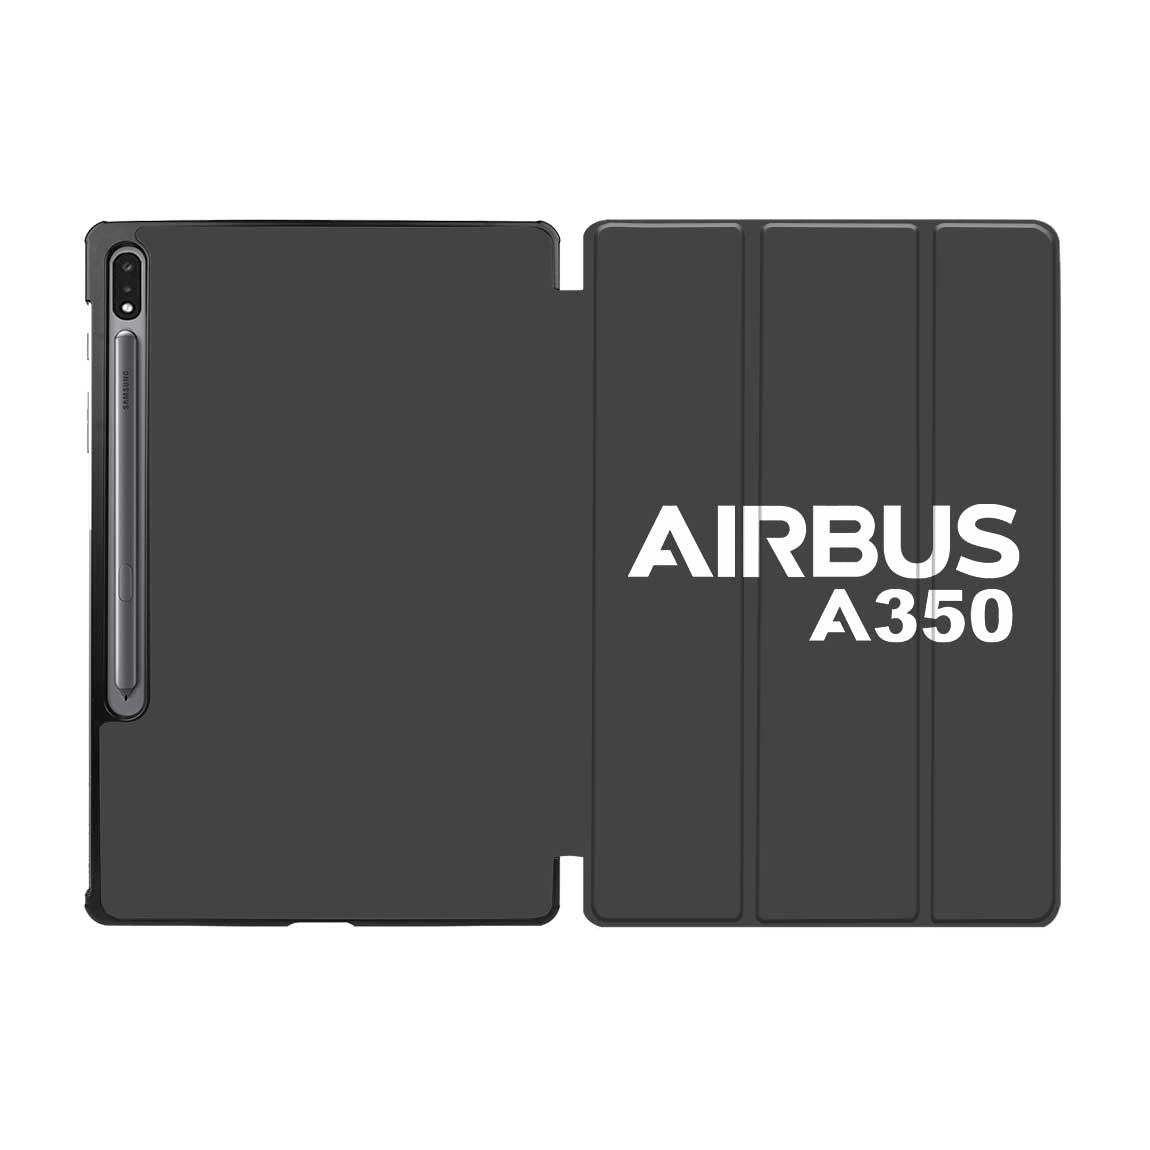 Airbus A350 & Text Designed Samsung Tablet Cases